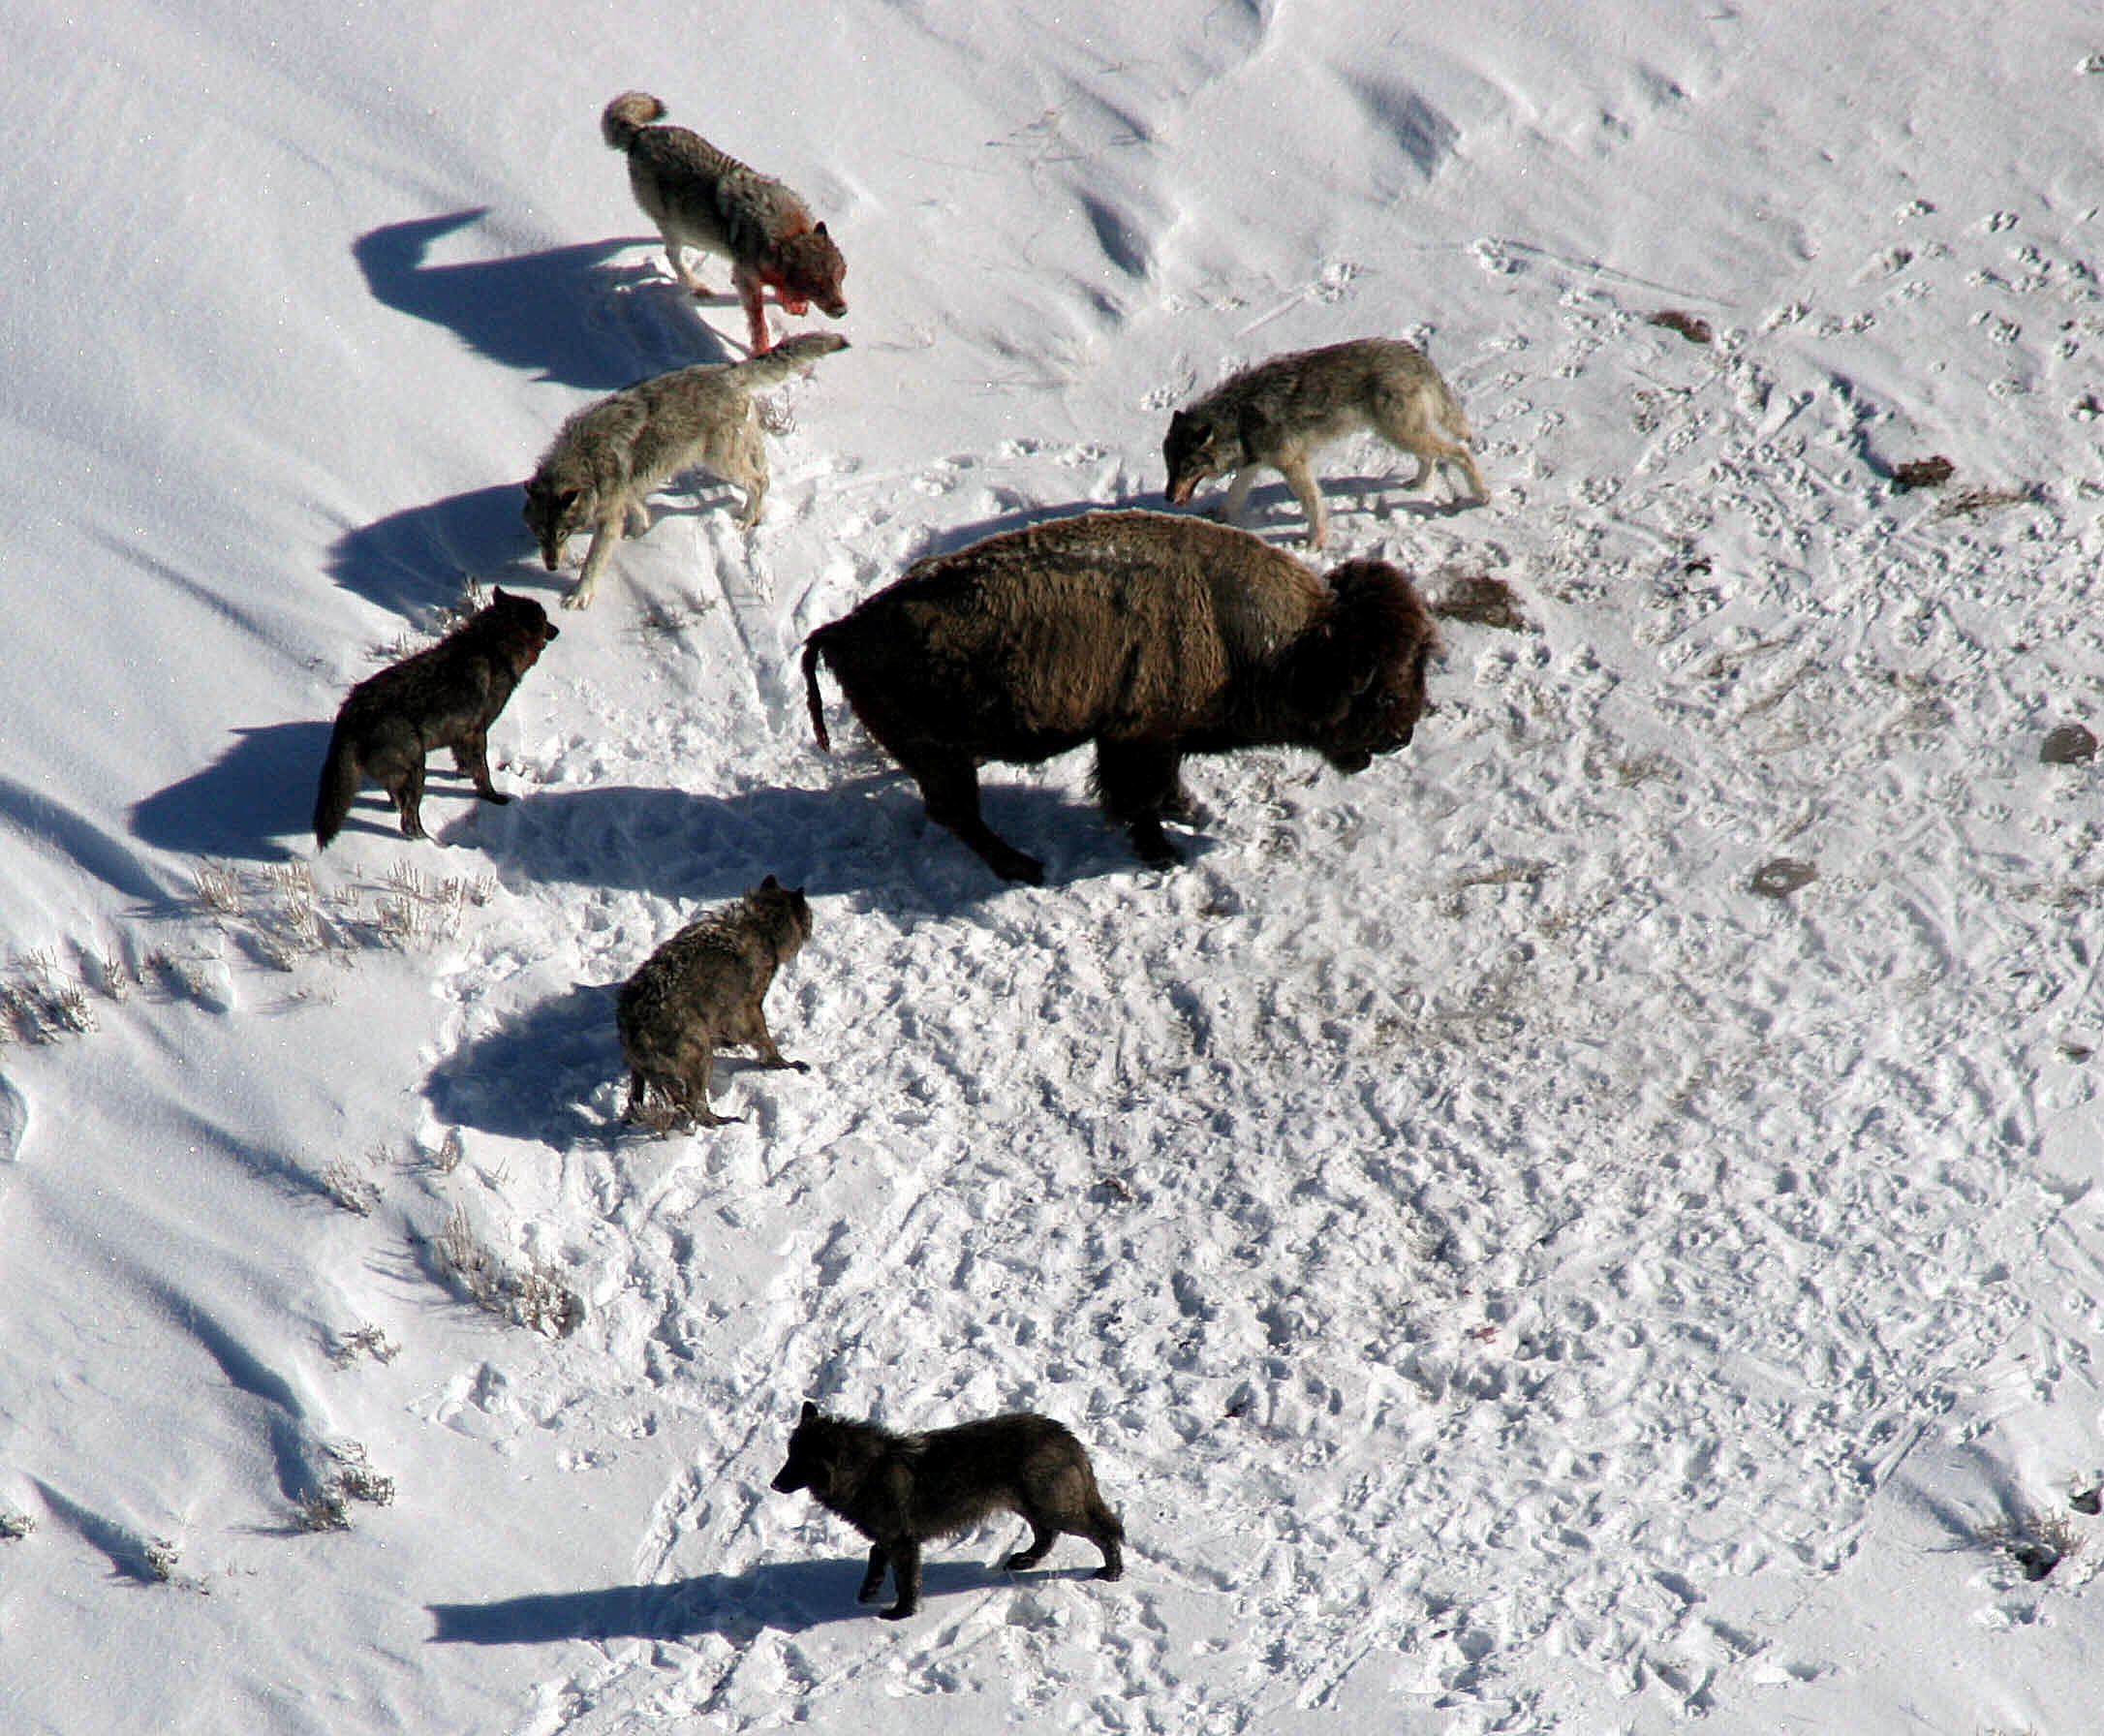 Wolves surround a bison in the snow.